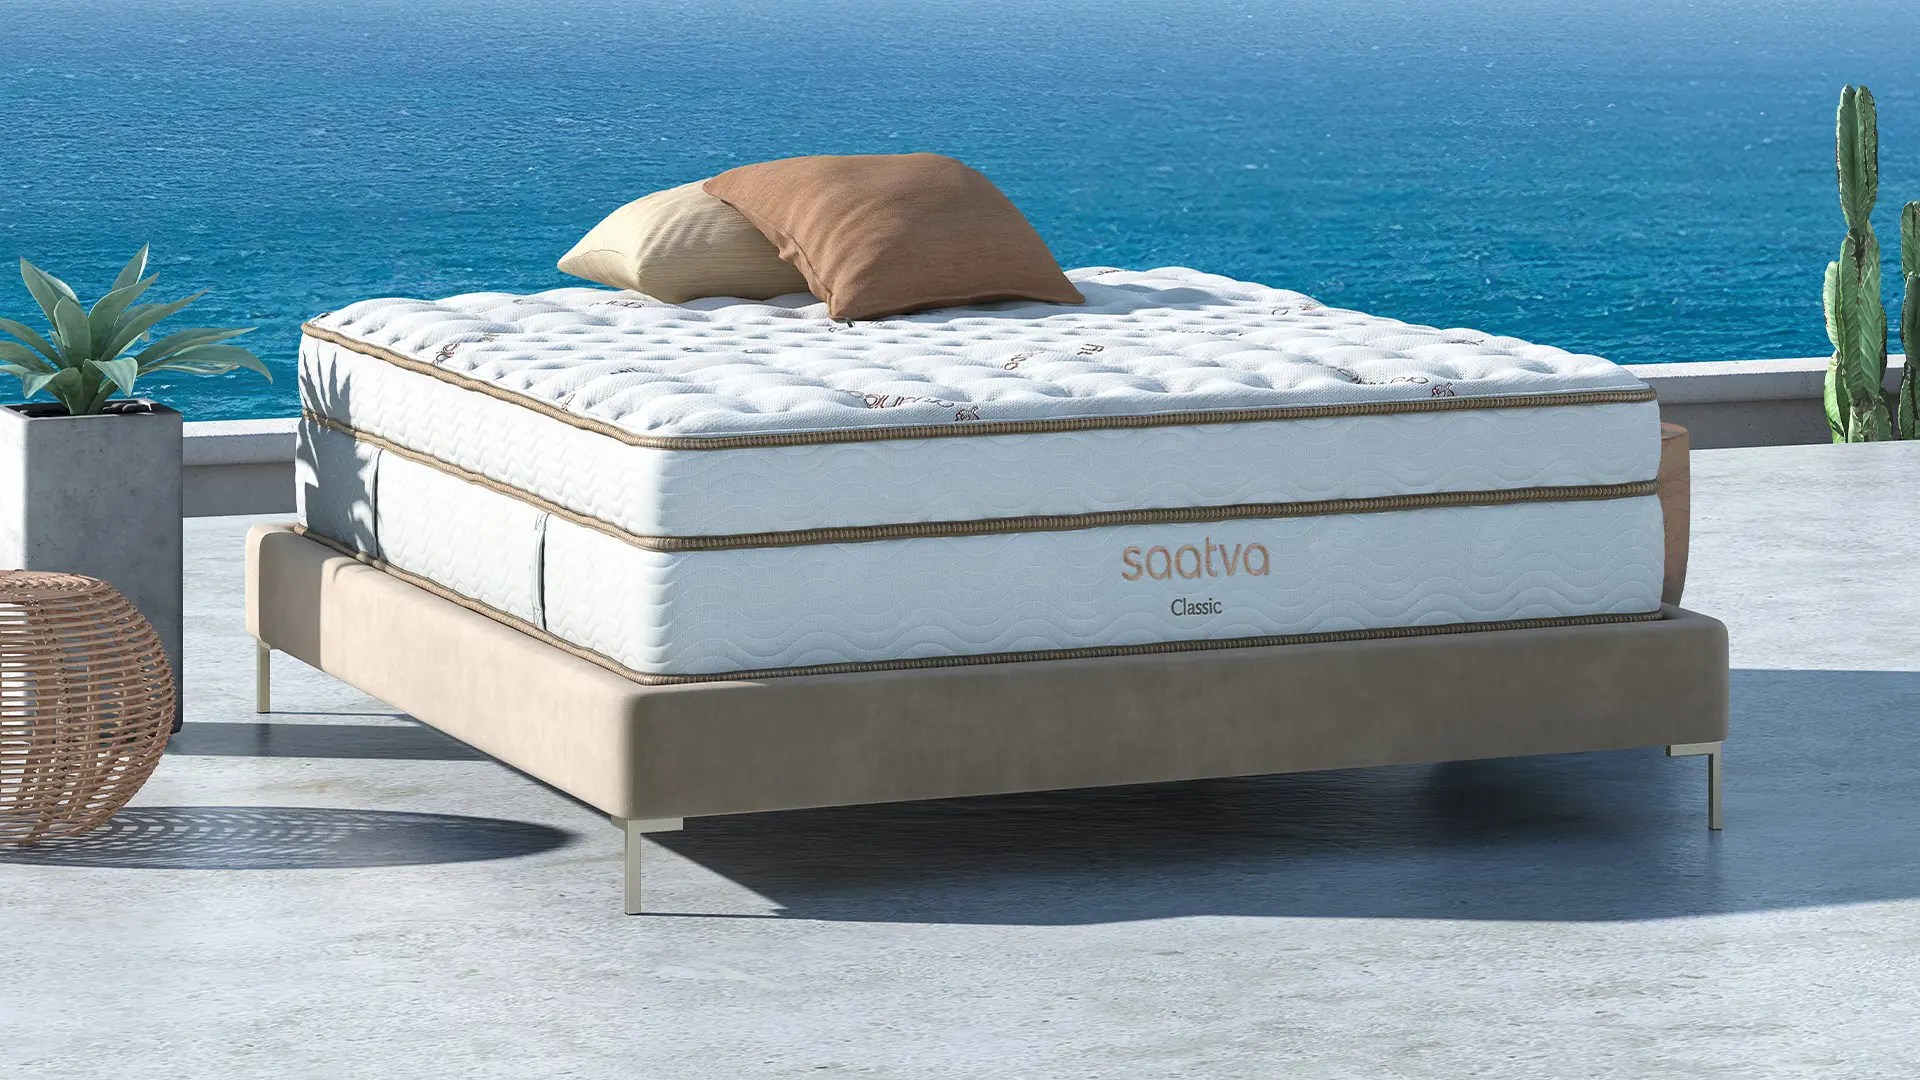 saatva mattress on a surface in front of the ocean